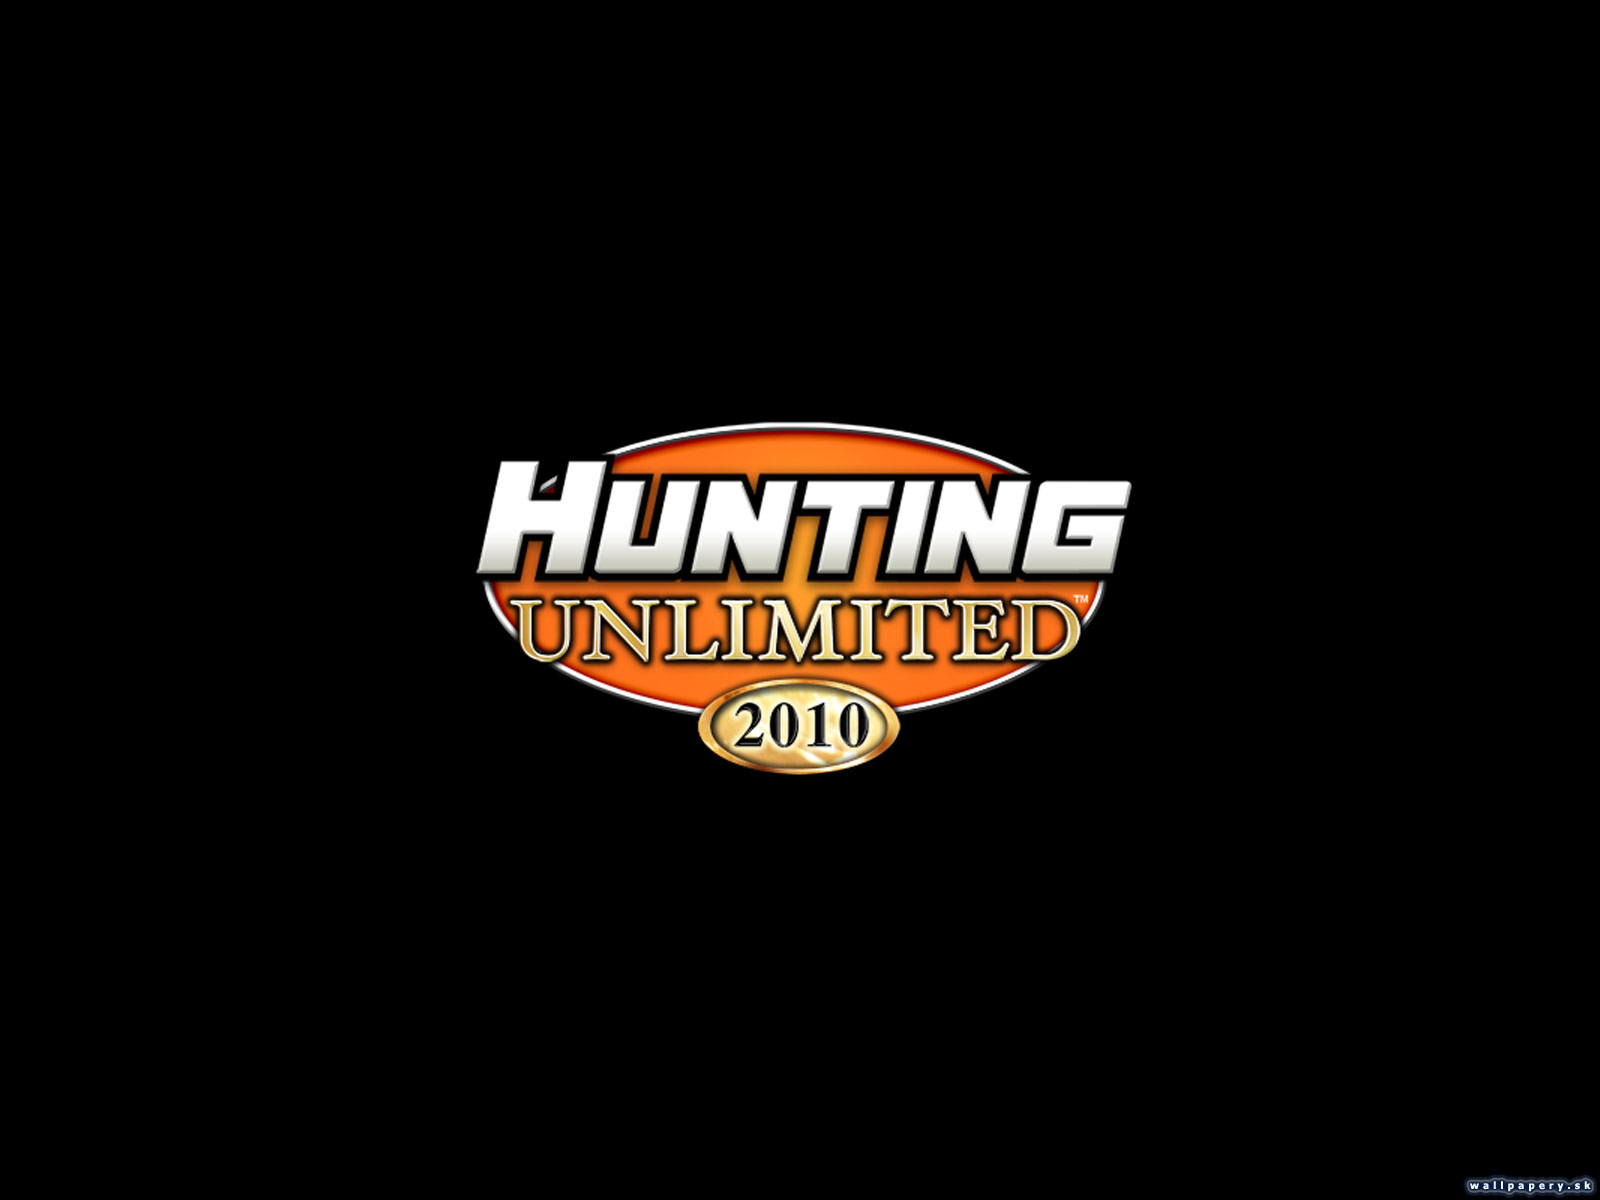 Hunting Unlimited 2010 - wallpaper 1